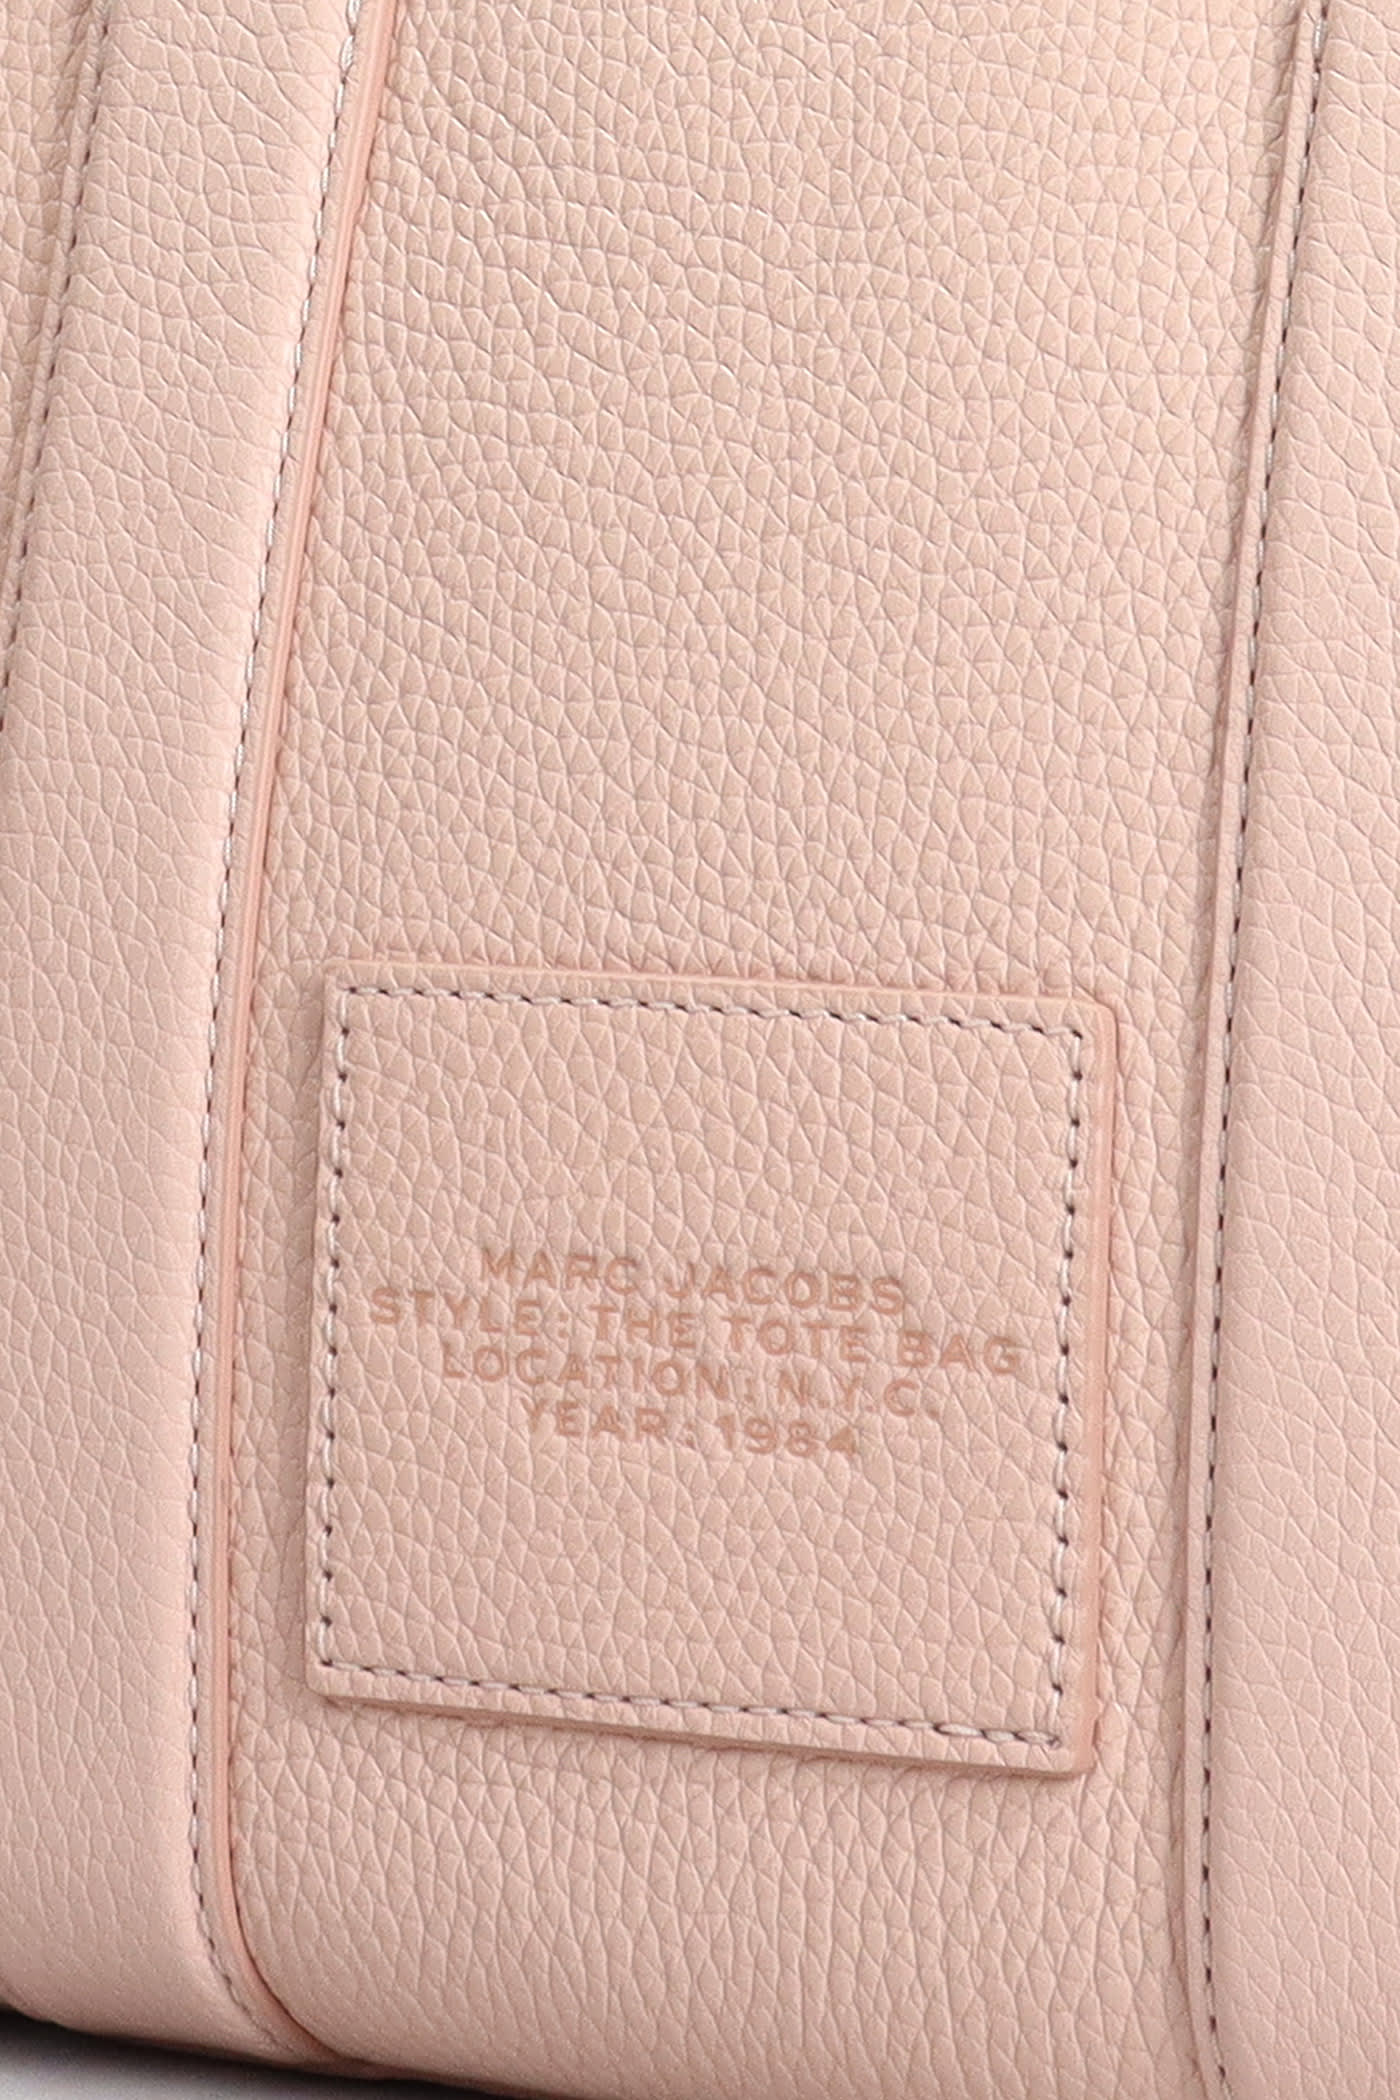 Marc Jacobs The Mini Tote Tote in Rose-Pink Leather